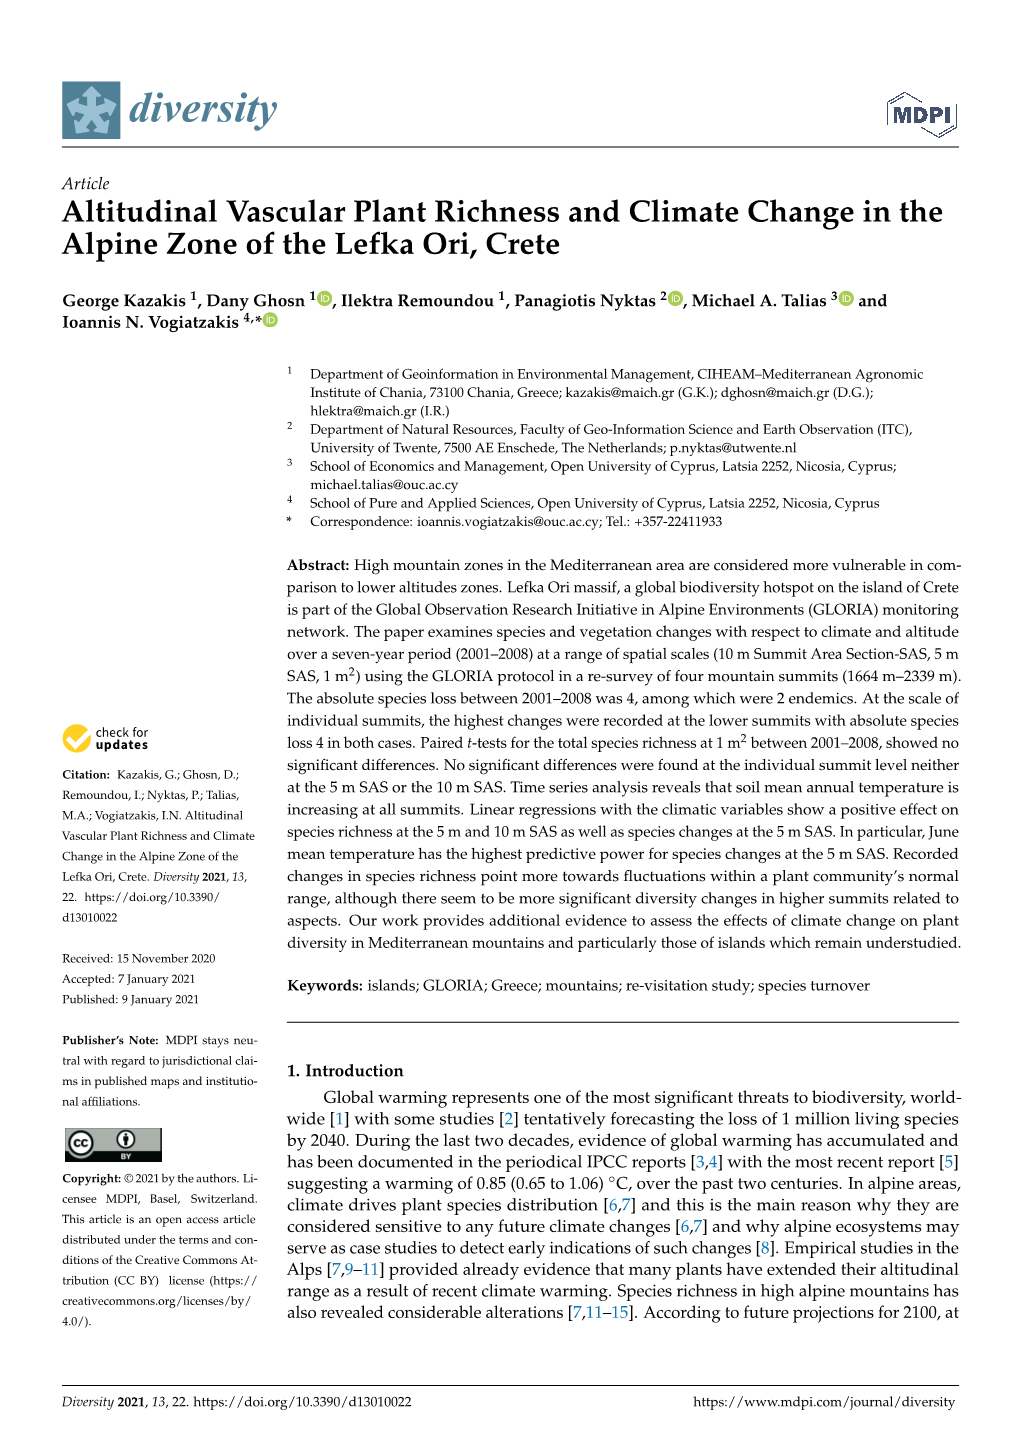 Altitudinal Vascular Plant Richness and Climate Change in the Alpine Zone of the Lefka Ori, Crete